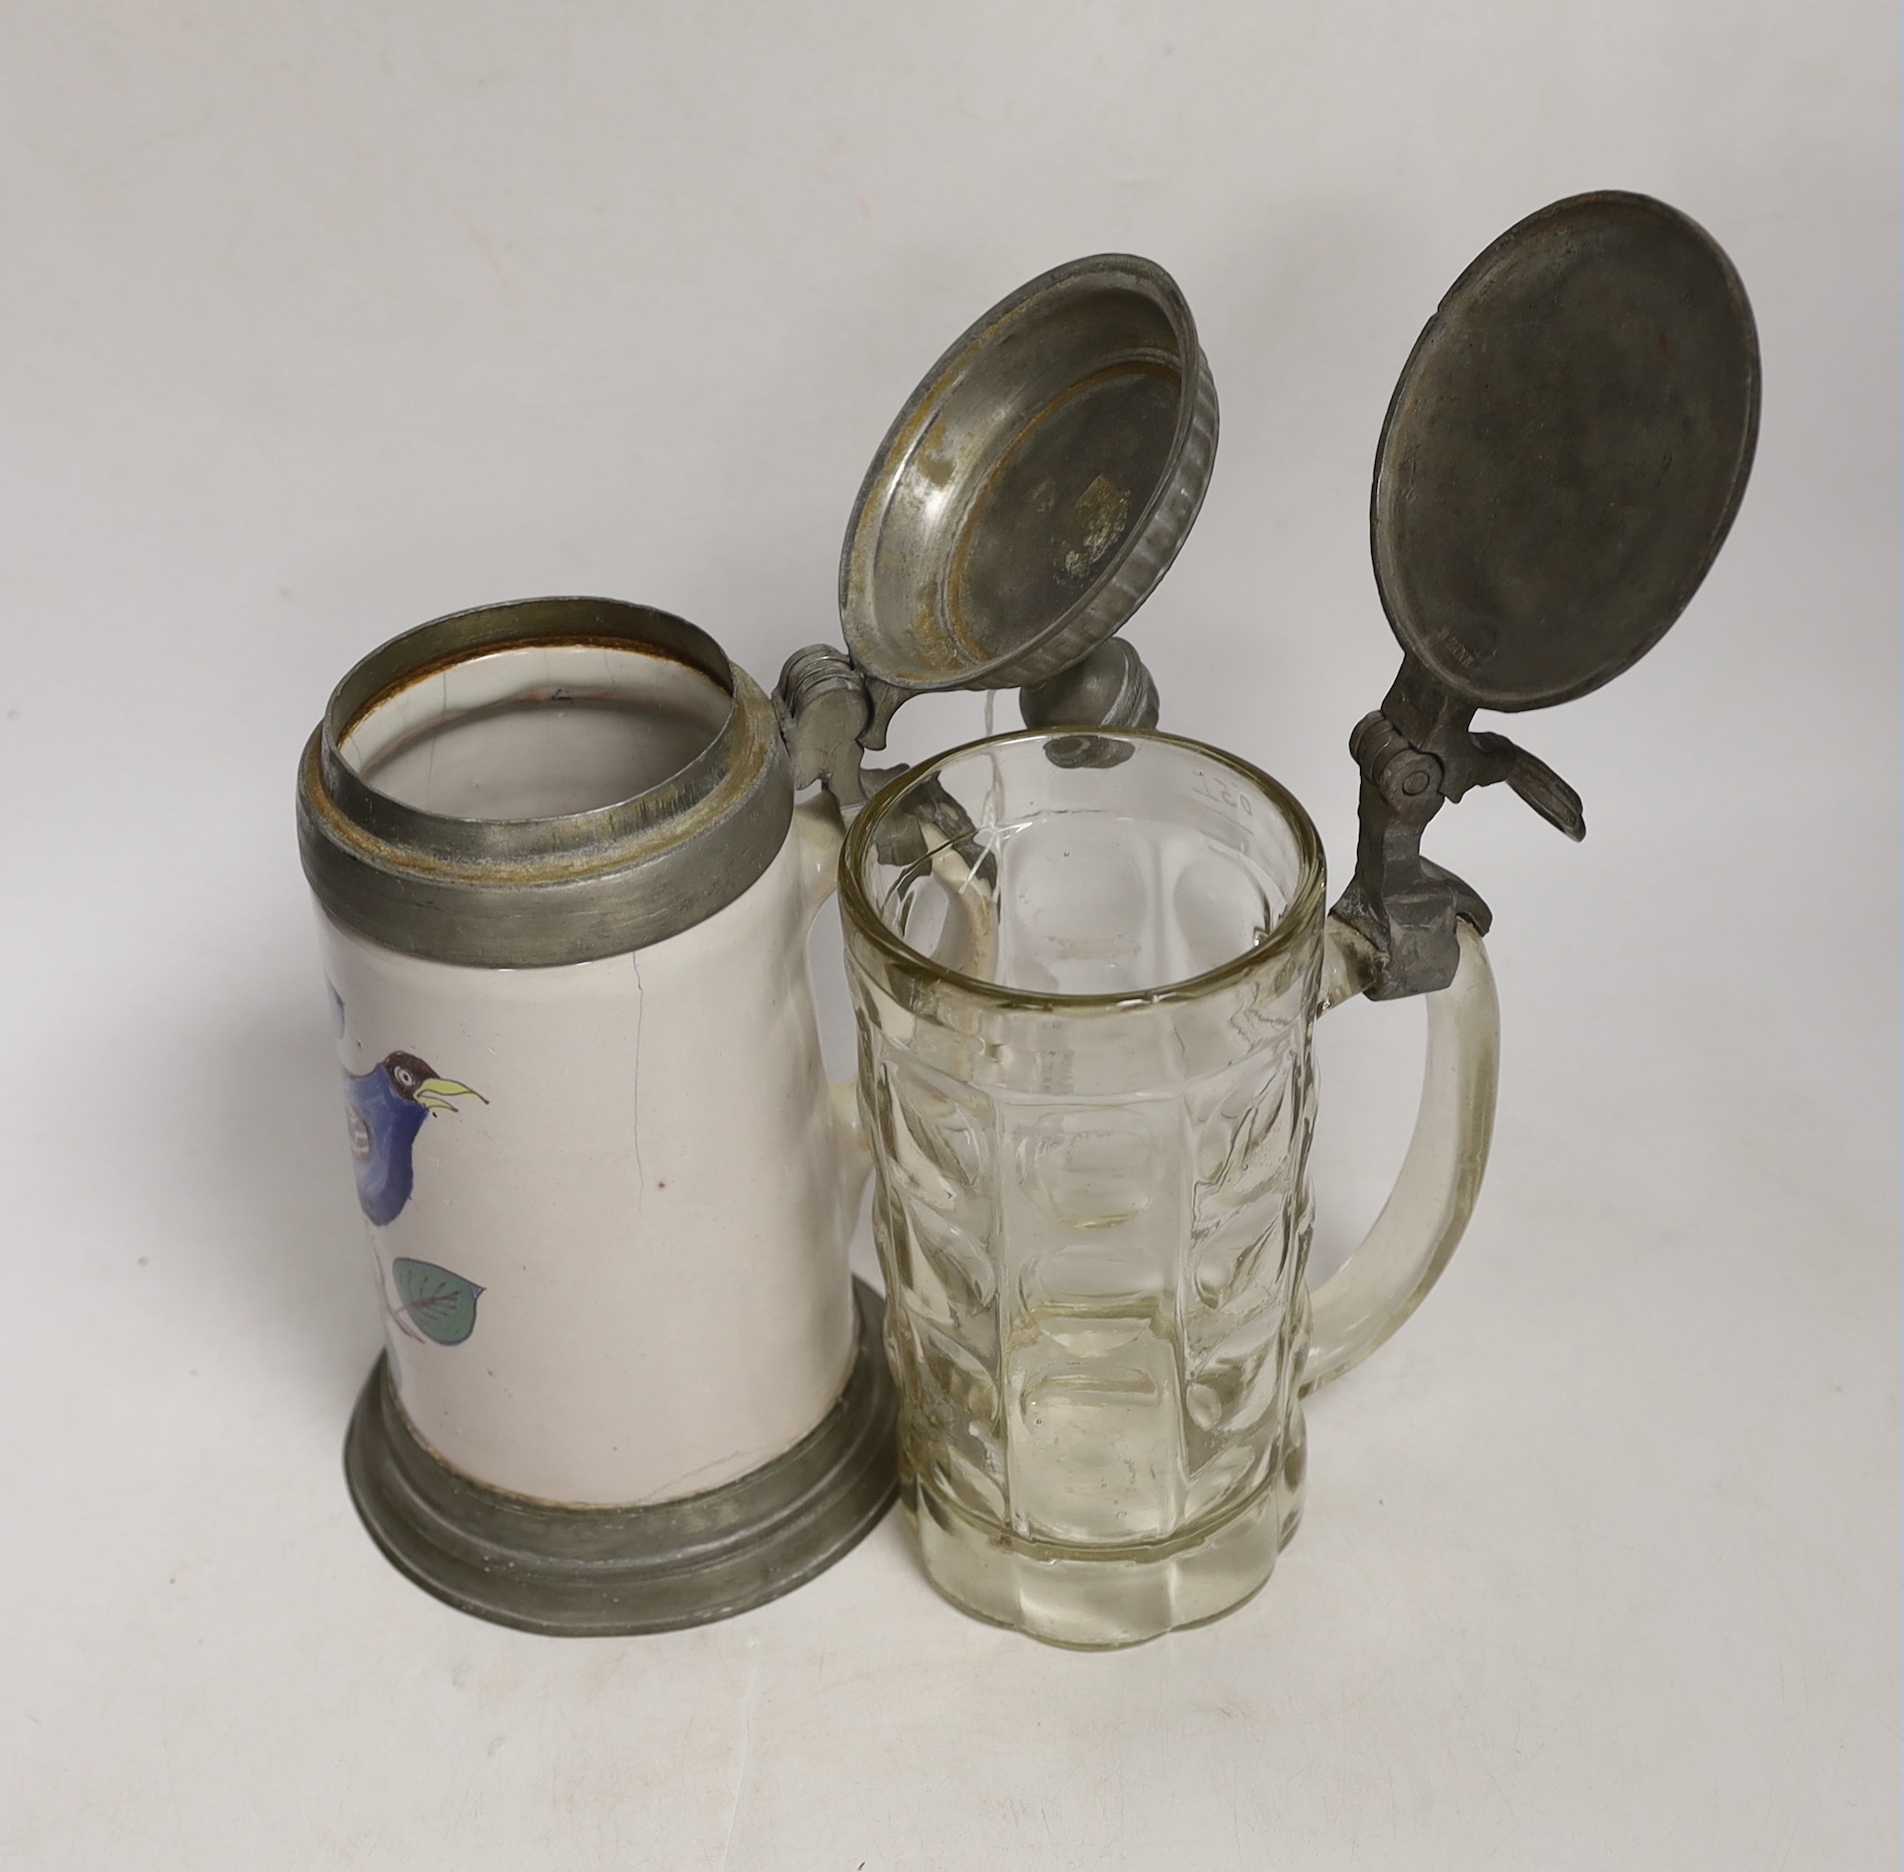 Two German steins including a faience example, together with a glass inkwell, largest 24cm high